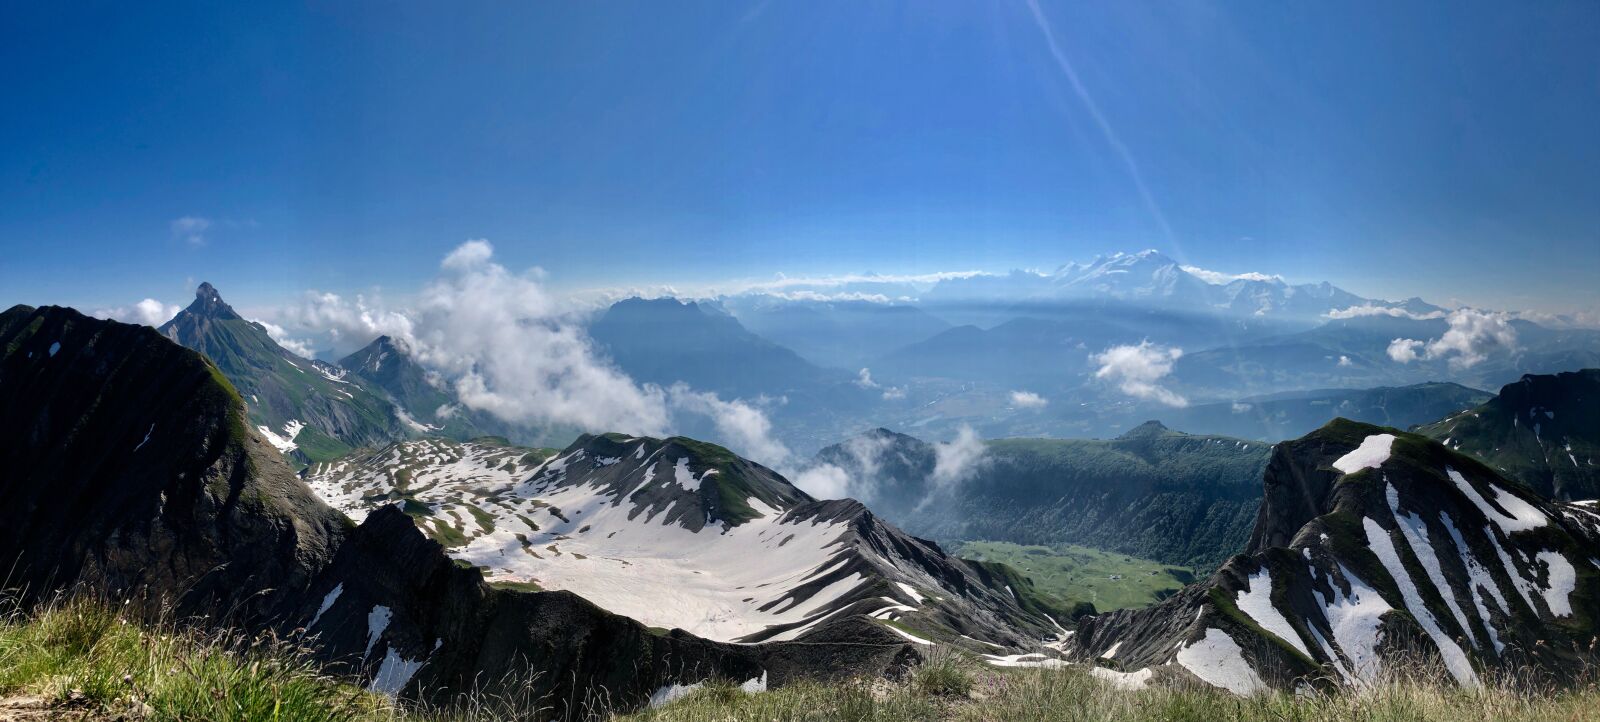 Apple iPhone X sample photo. Alps, mont blanc, mountain photography